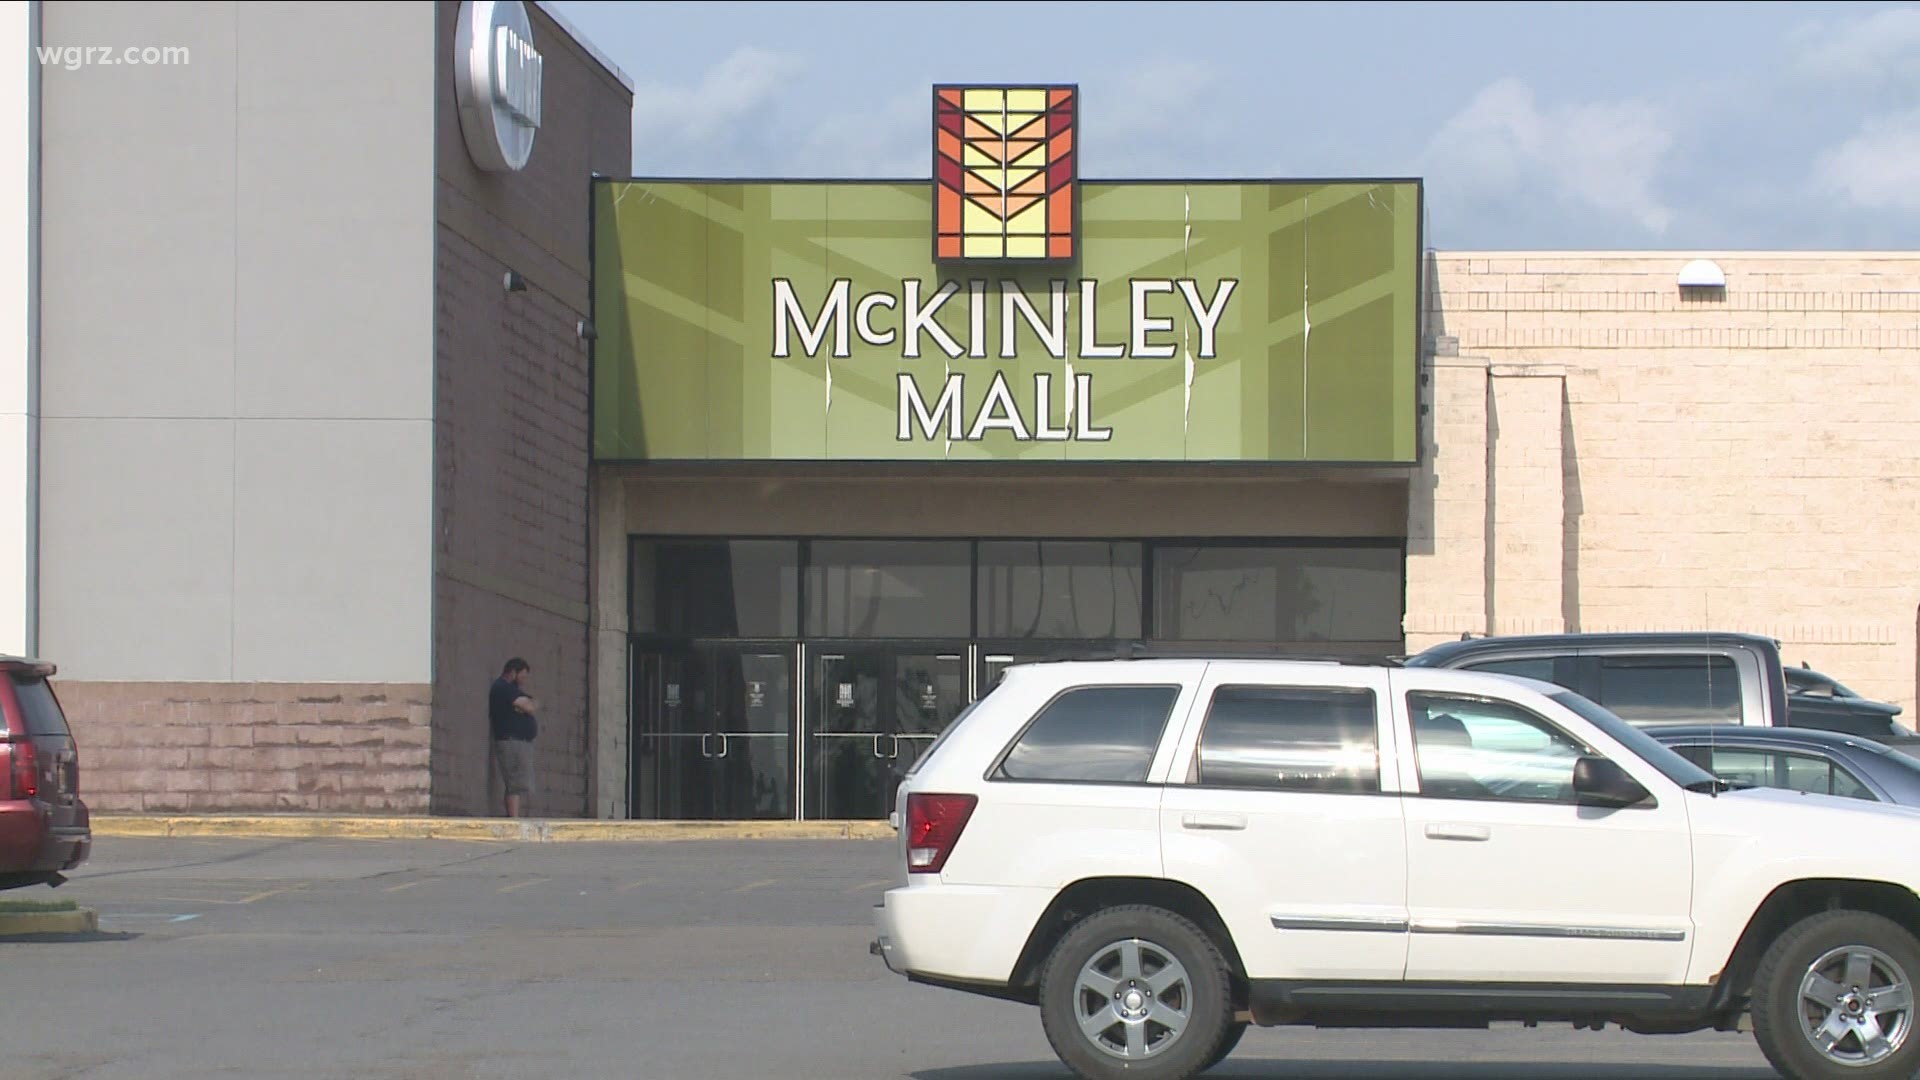 The State Supreme Court on Thursday approved the sales agreement for Mike Kohan of Kohan Retail Investment Group to buy the mall for $8.5 million.